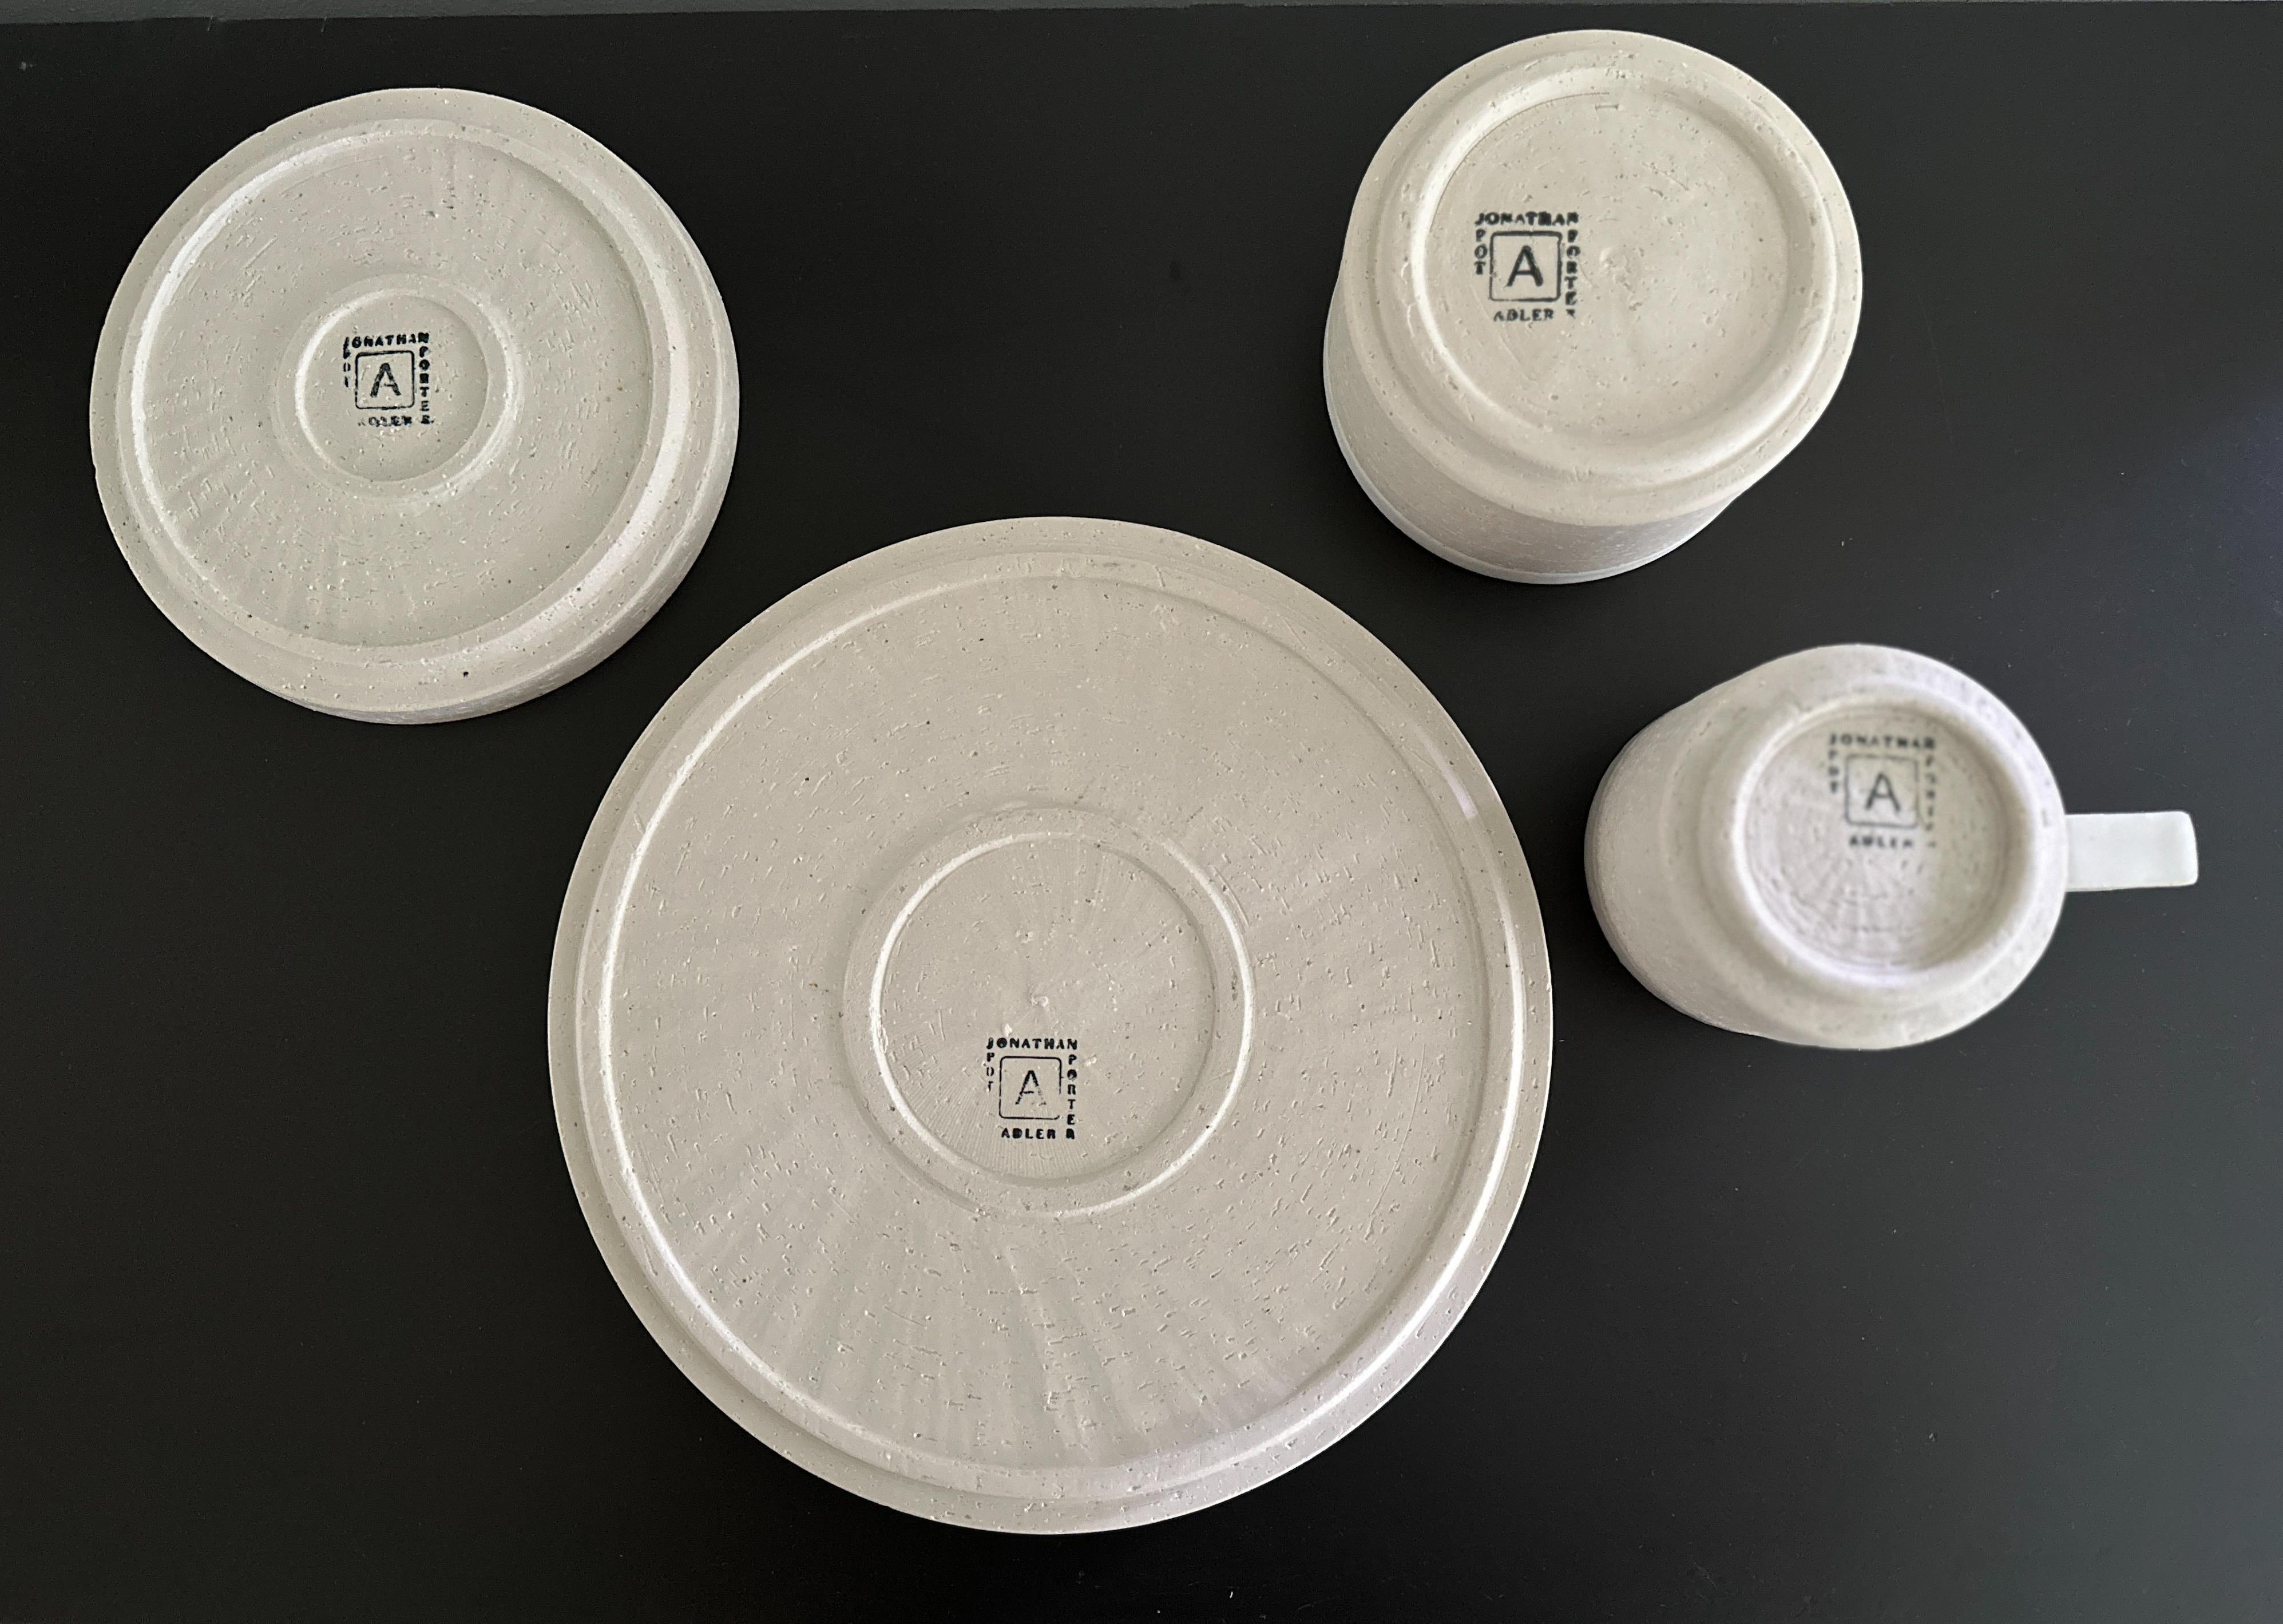 29 Piece Set of Pottery Tableware Designed by Jonathan Adler, Brazilia Pattern For Sale 3